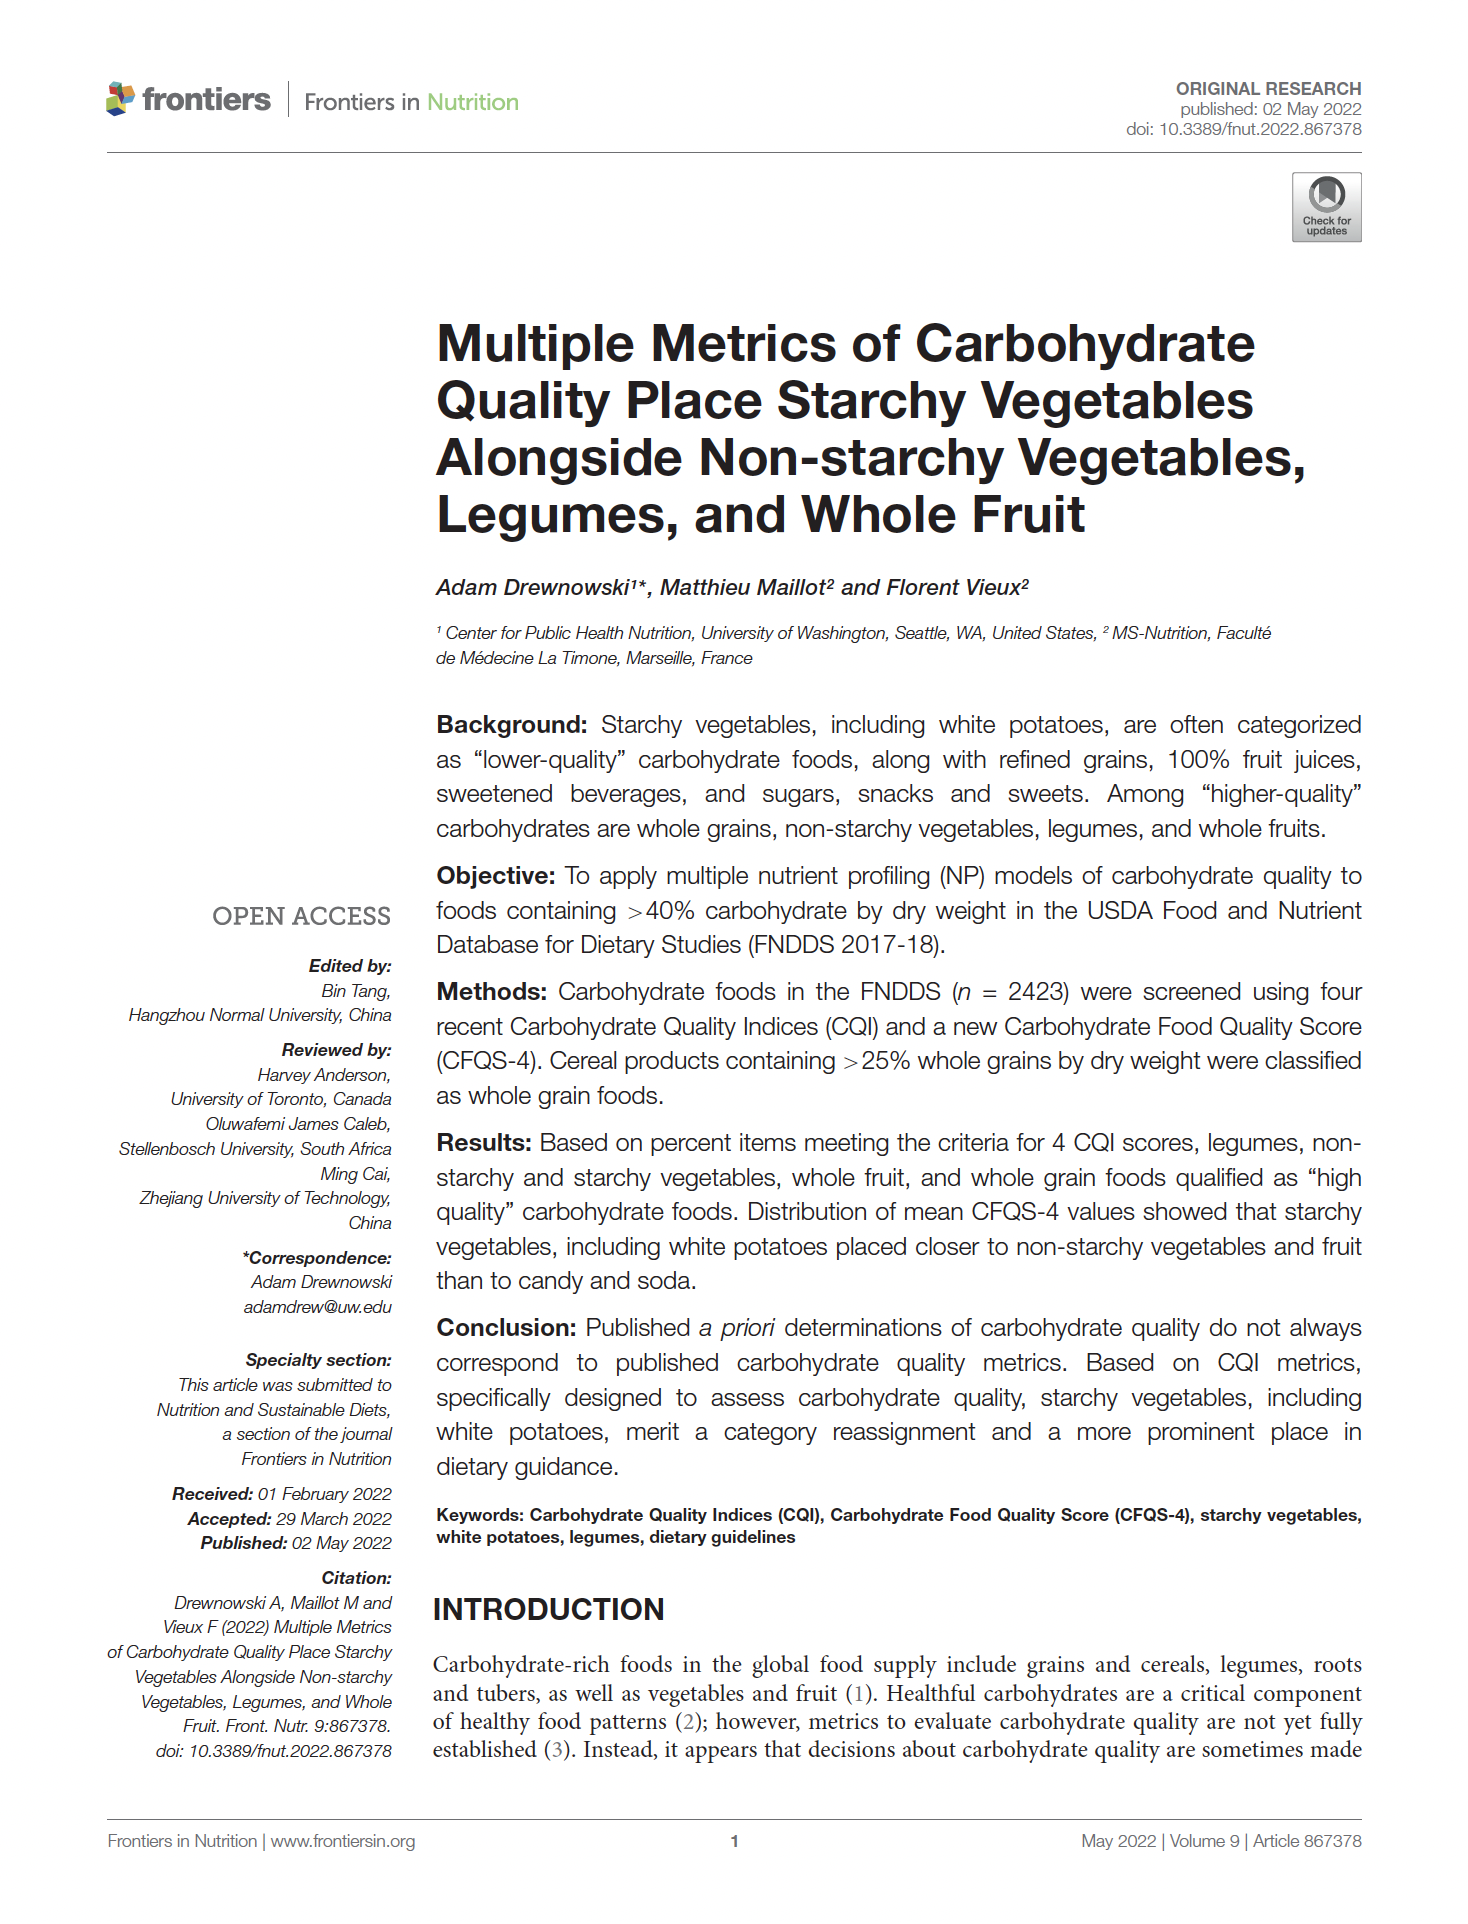 Metrics of Carbohydrate Quality